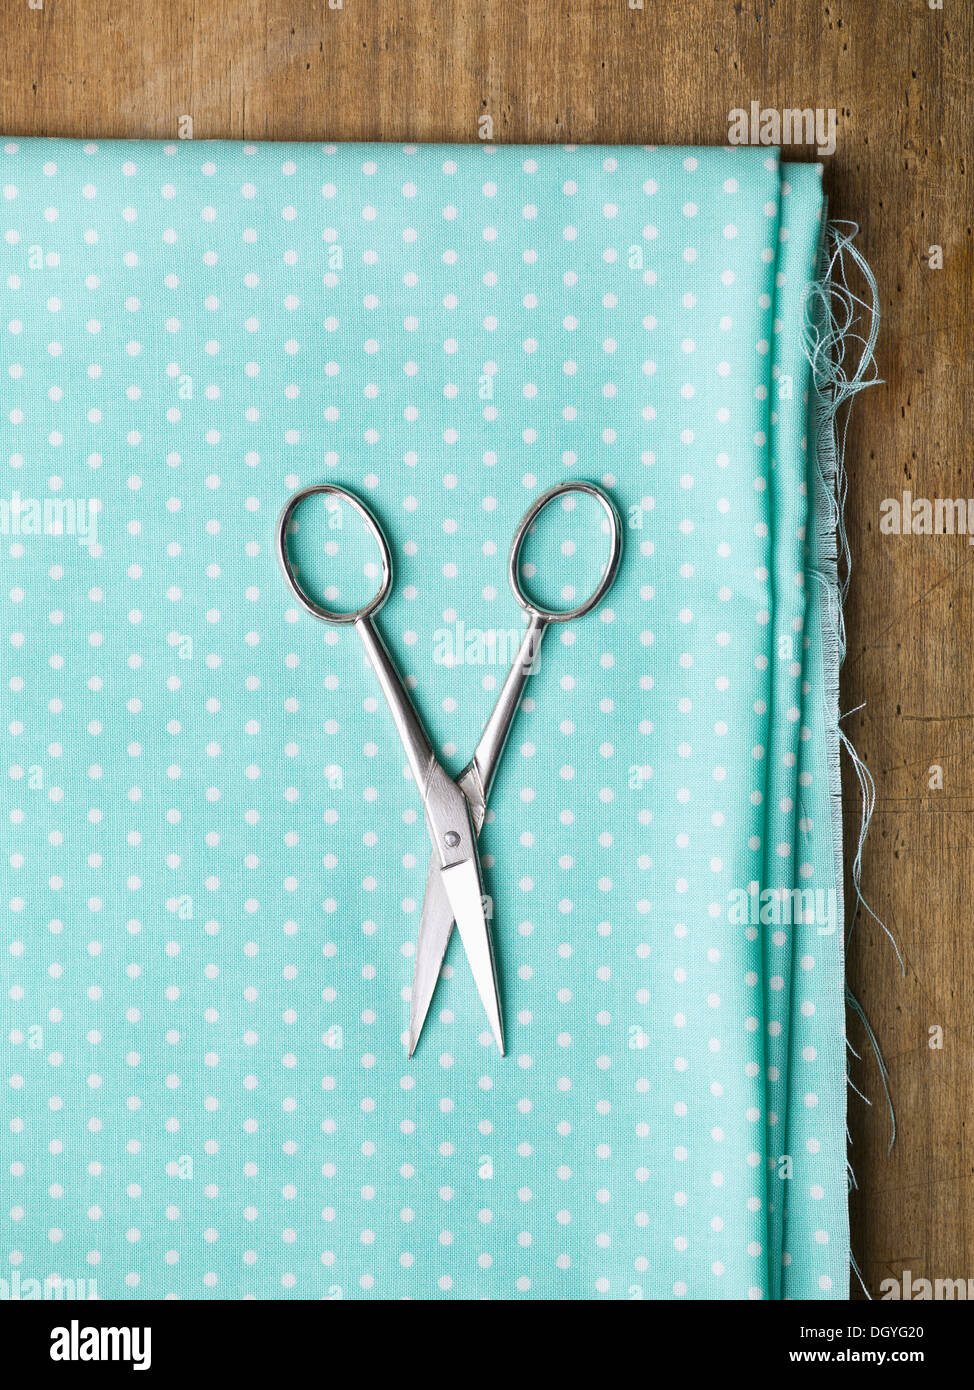 A pair of scissors on top of polka dotted fabric Stock Photo